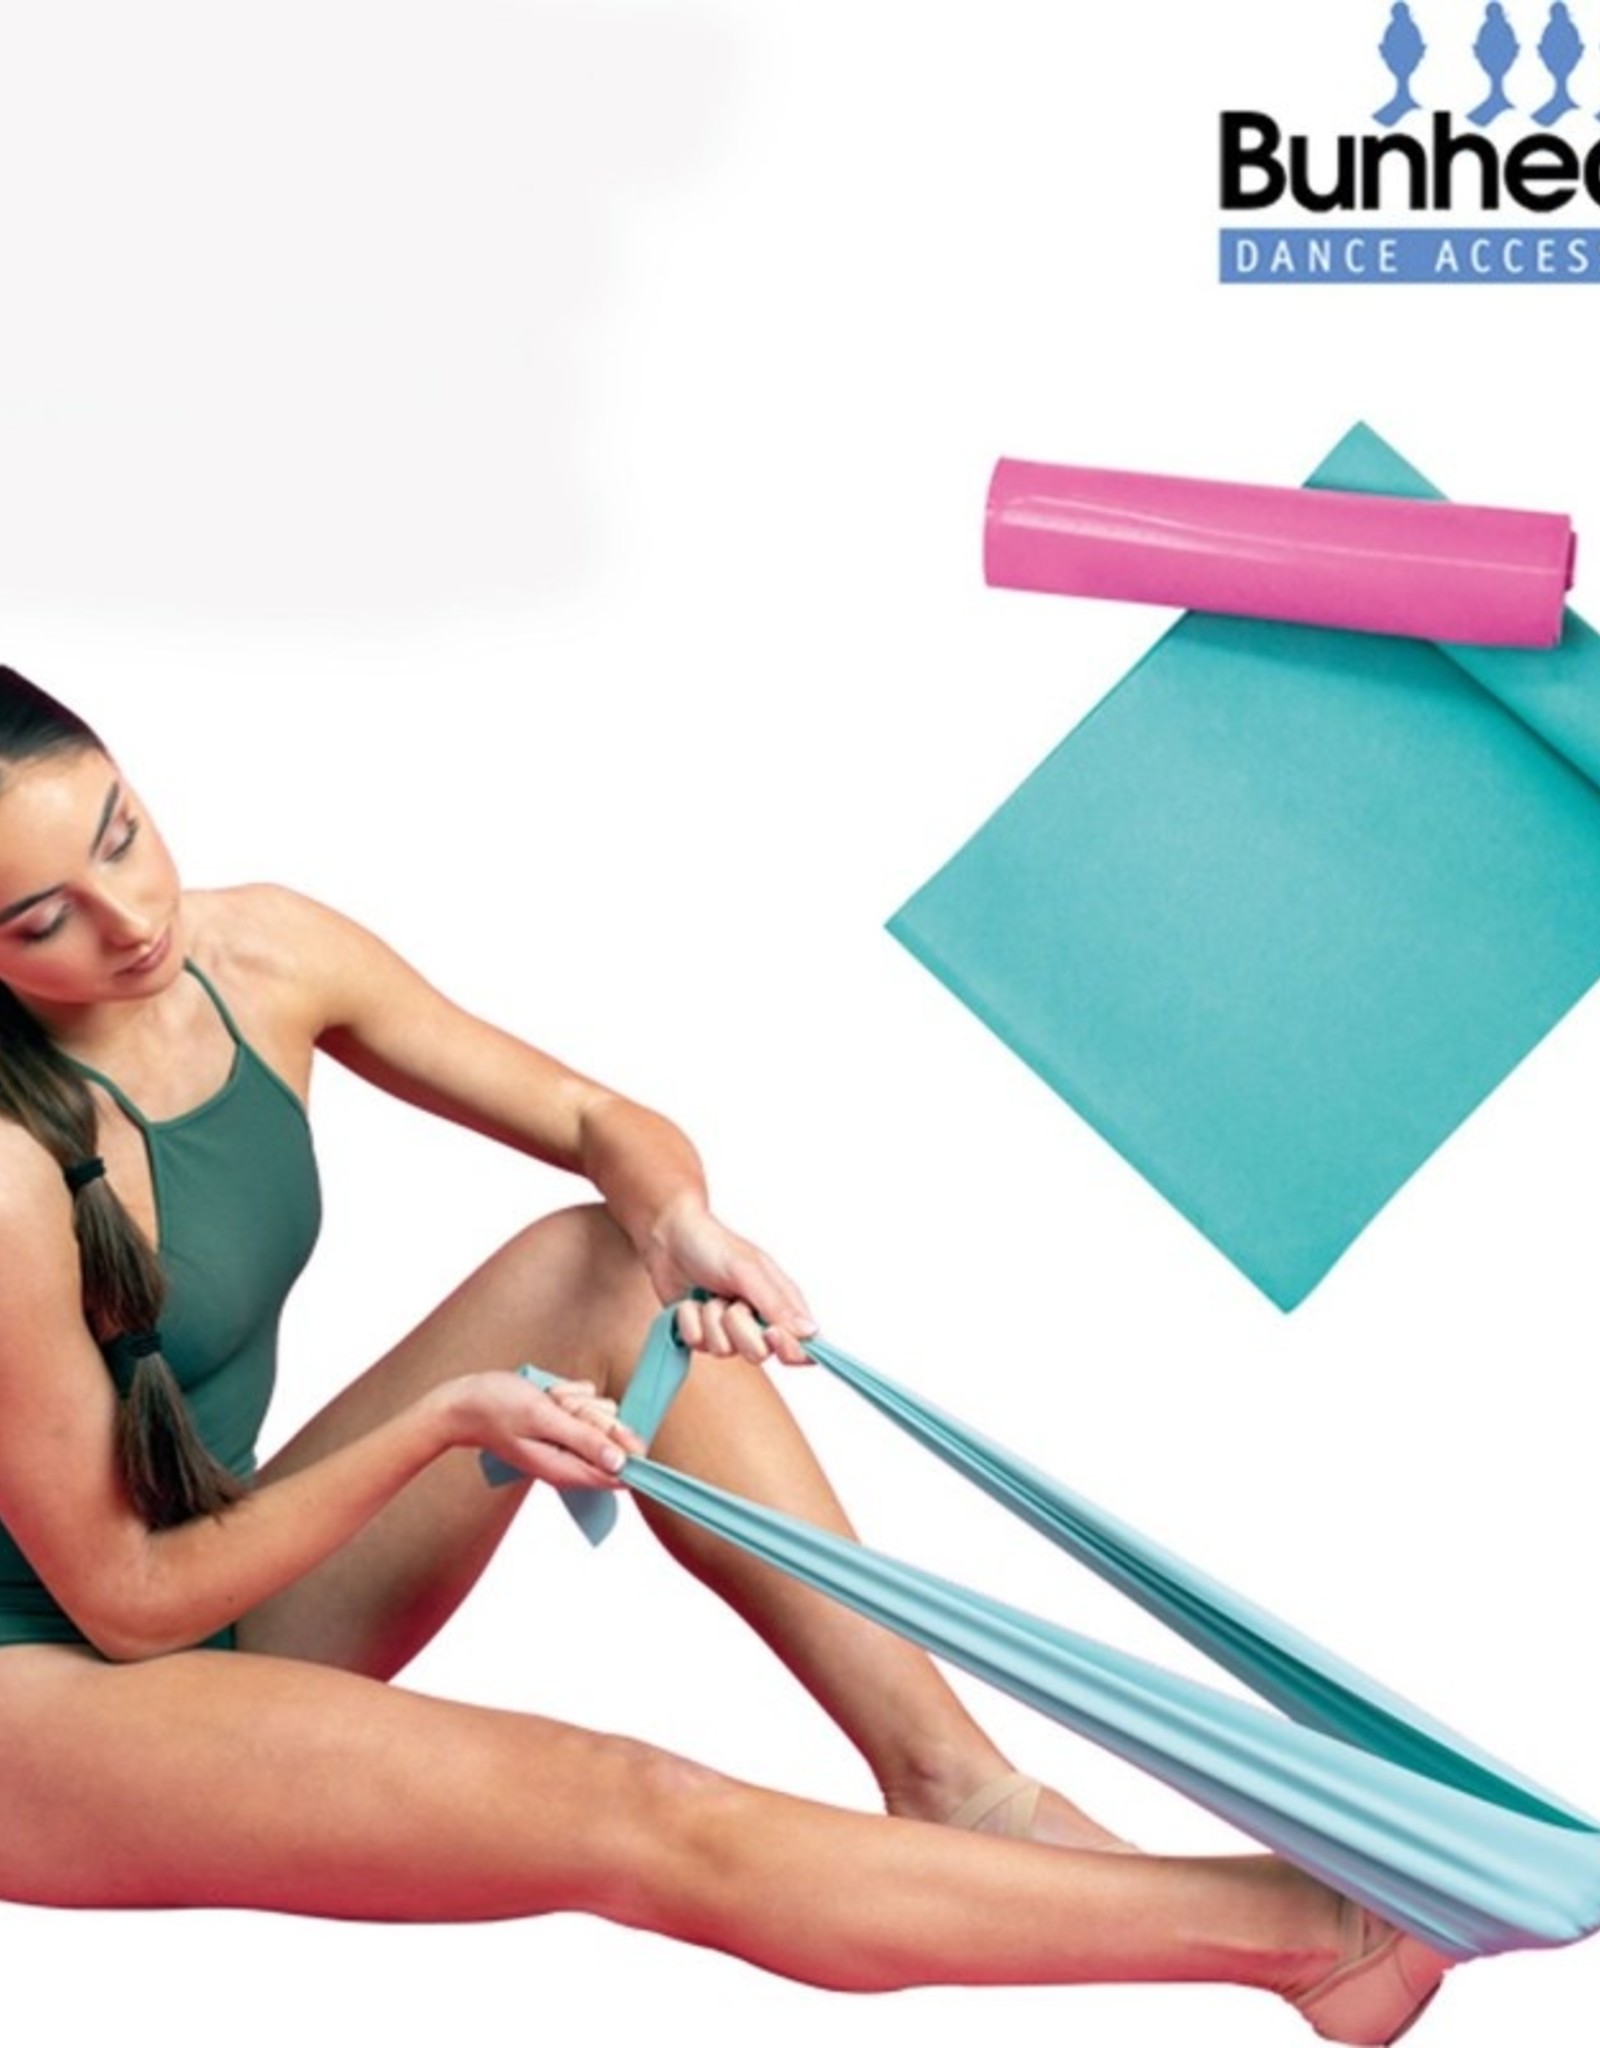 Capezio Bunheads Exercise Bands Combo Pack